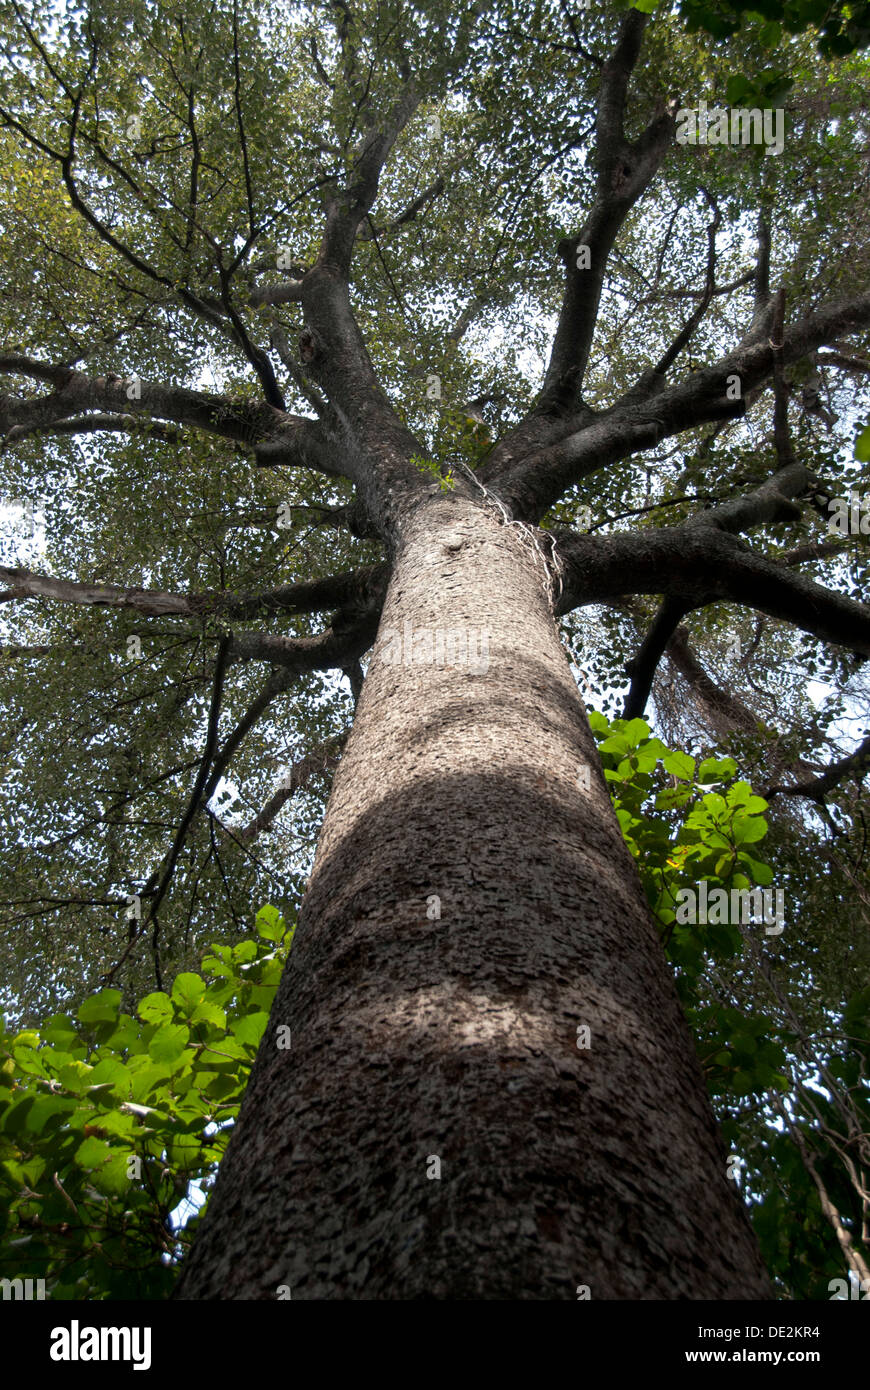 Large Iroko tree (Milicia excelsa), mulberry plant, root and crown from below, near Moshi, Tanzania, East Africa, Africa Stock Photo